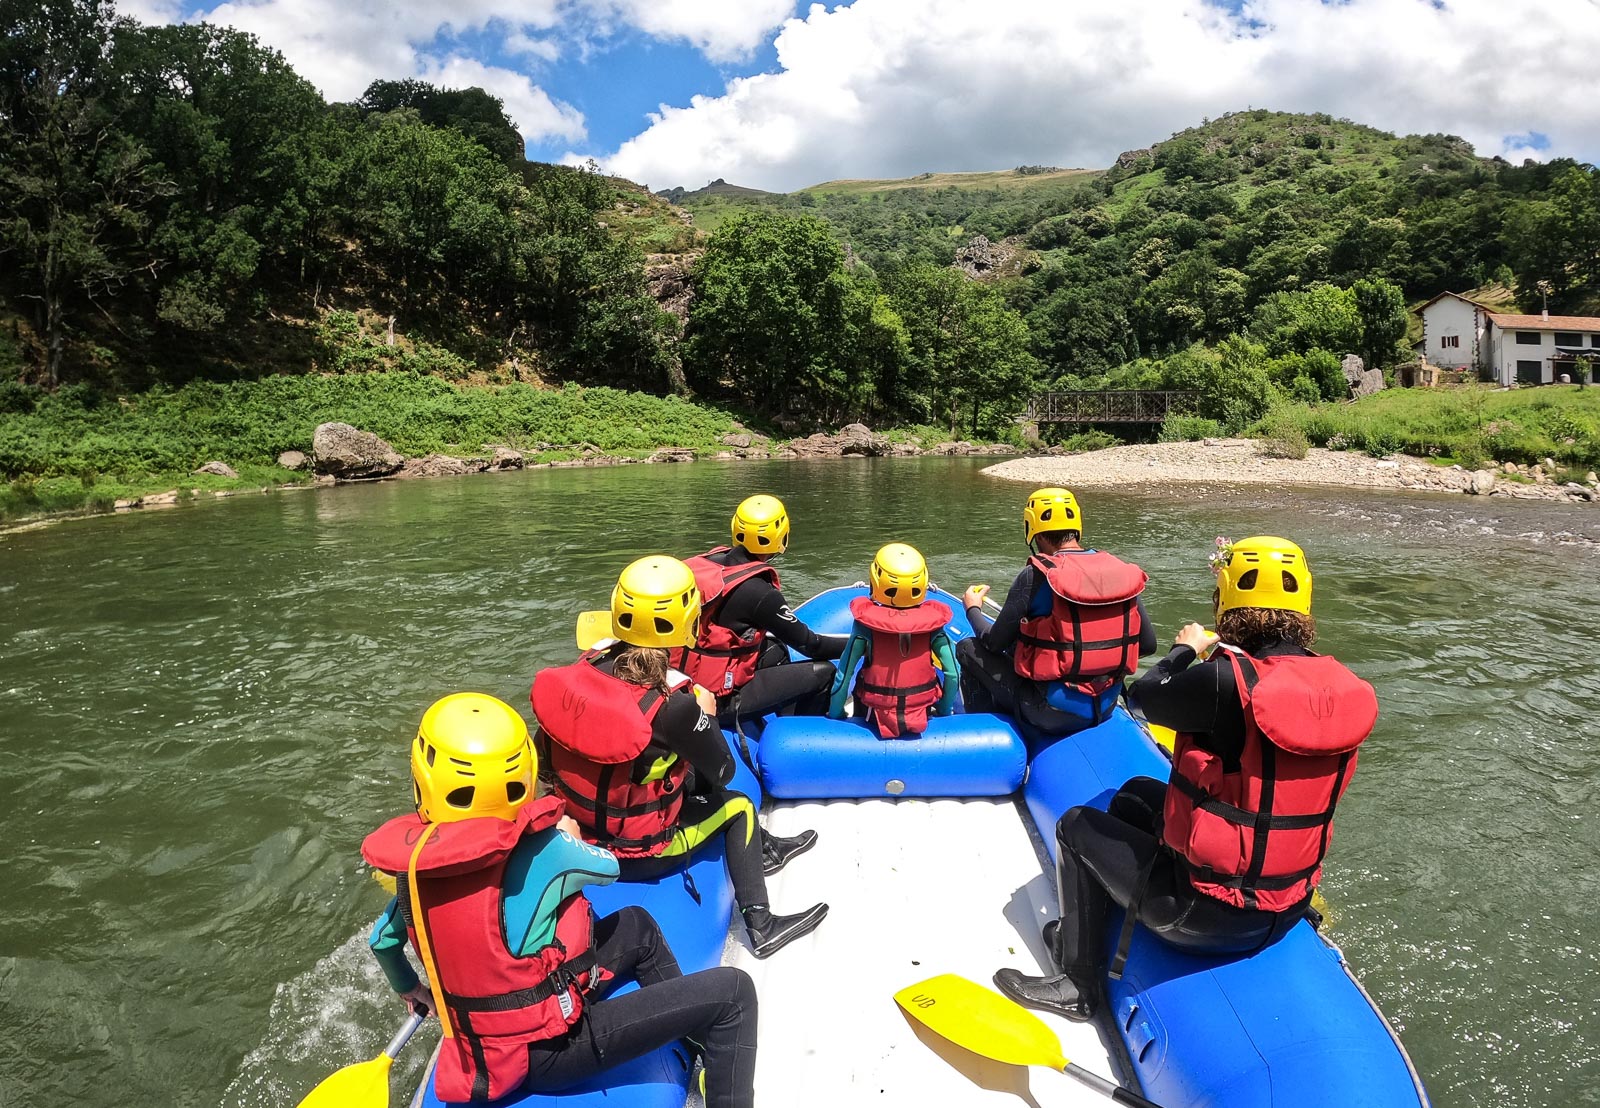 Rafting down the Nive: emotions and adrenaline!